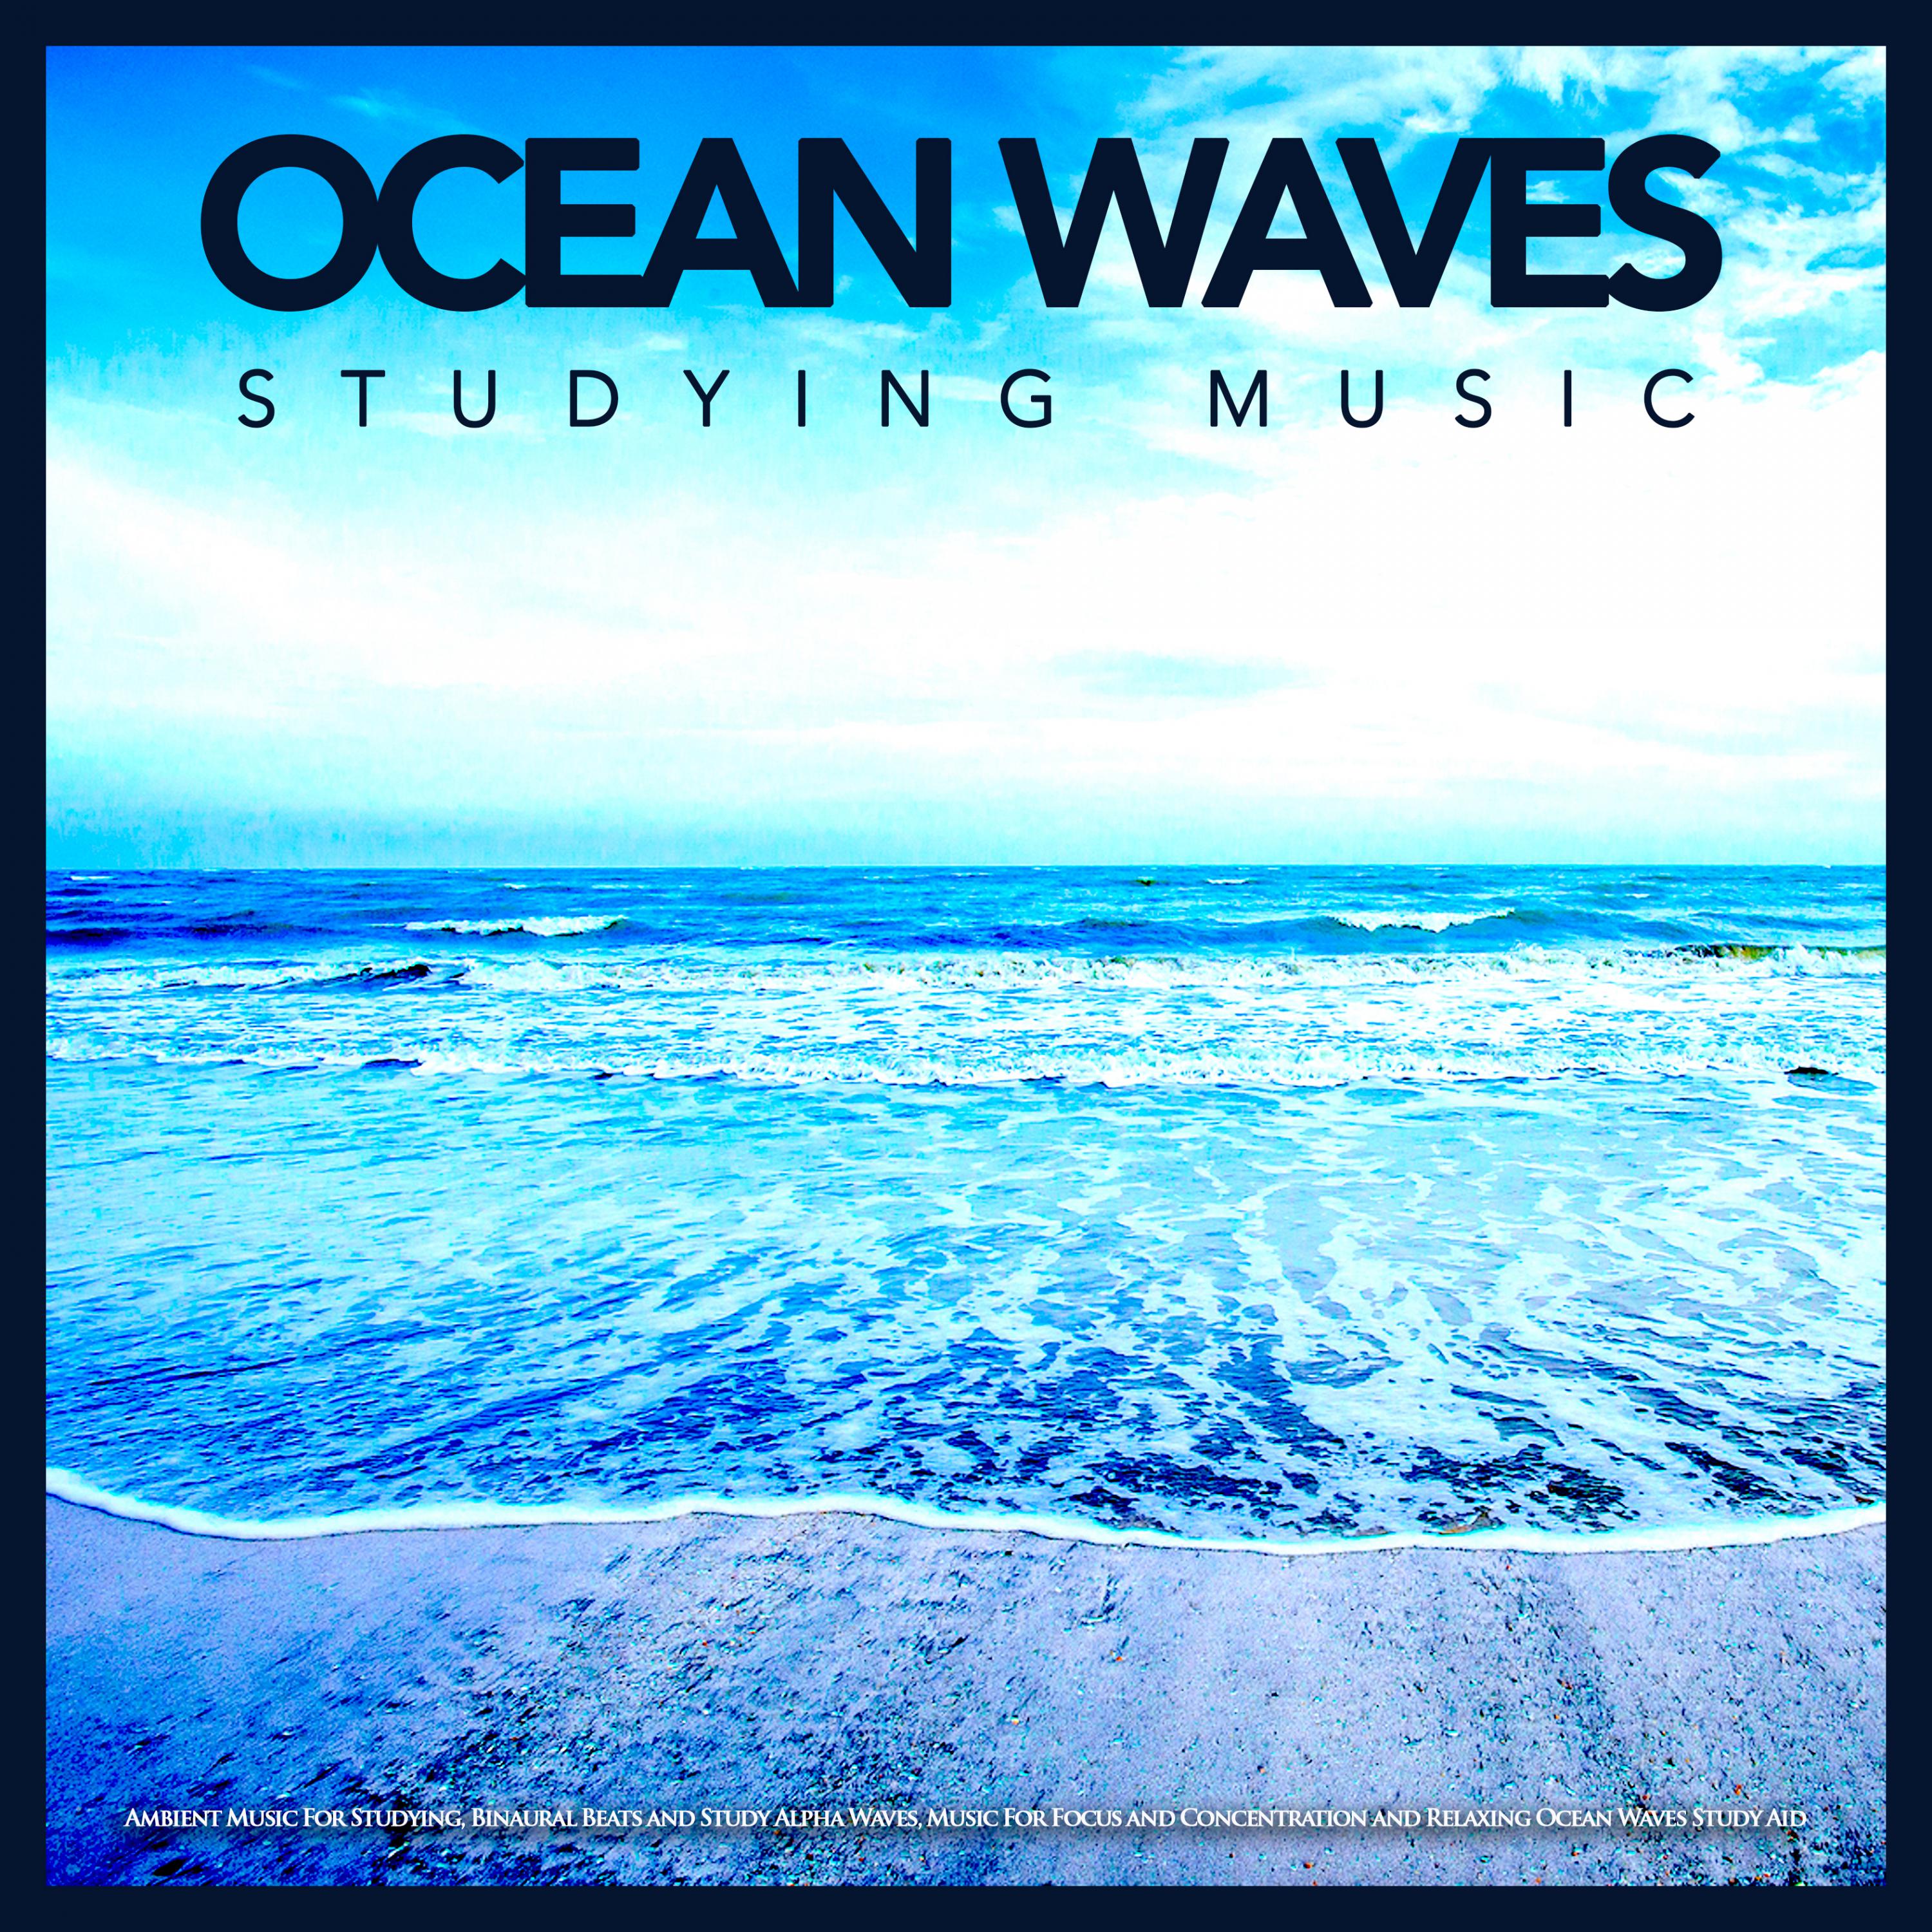 Ocean Waves Studying Music: Ambient Music For Studying, Binaural Beats and Study Alpha Waves, Music For Focus and Concentration and Relaxing Ocean Waves Study Aid